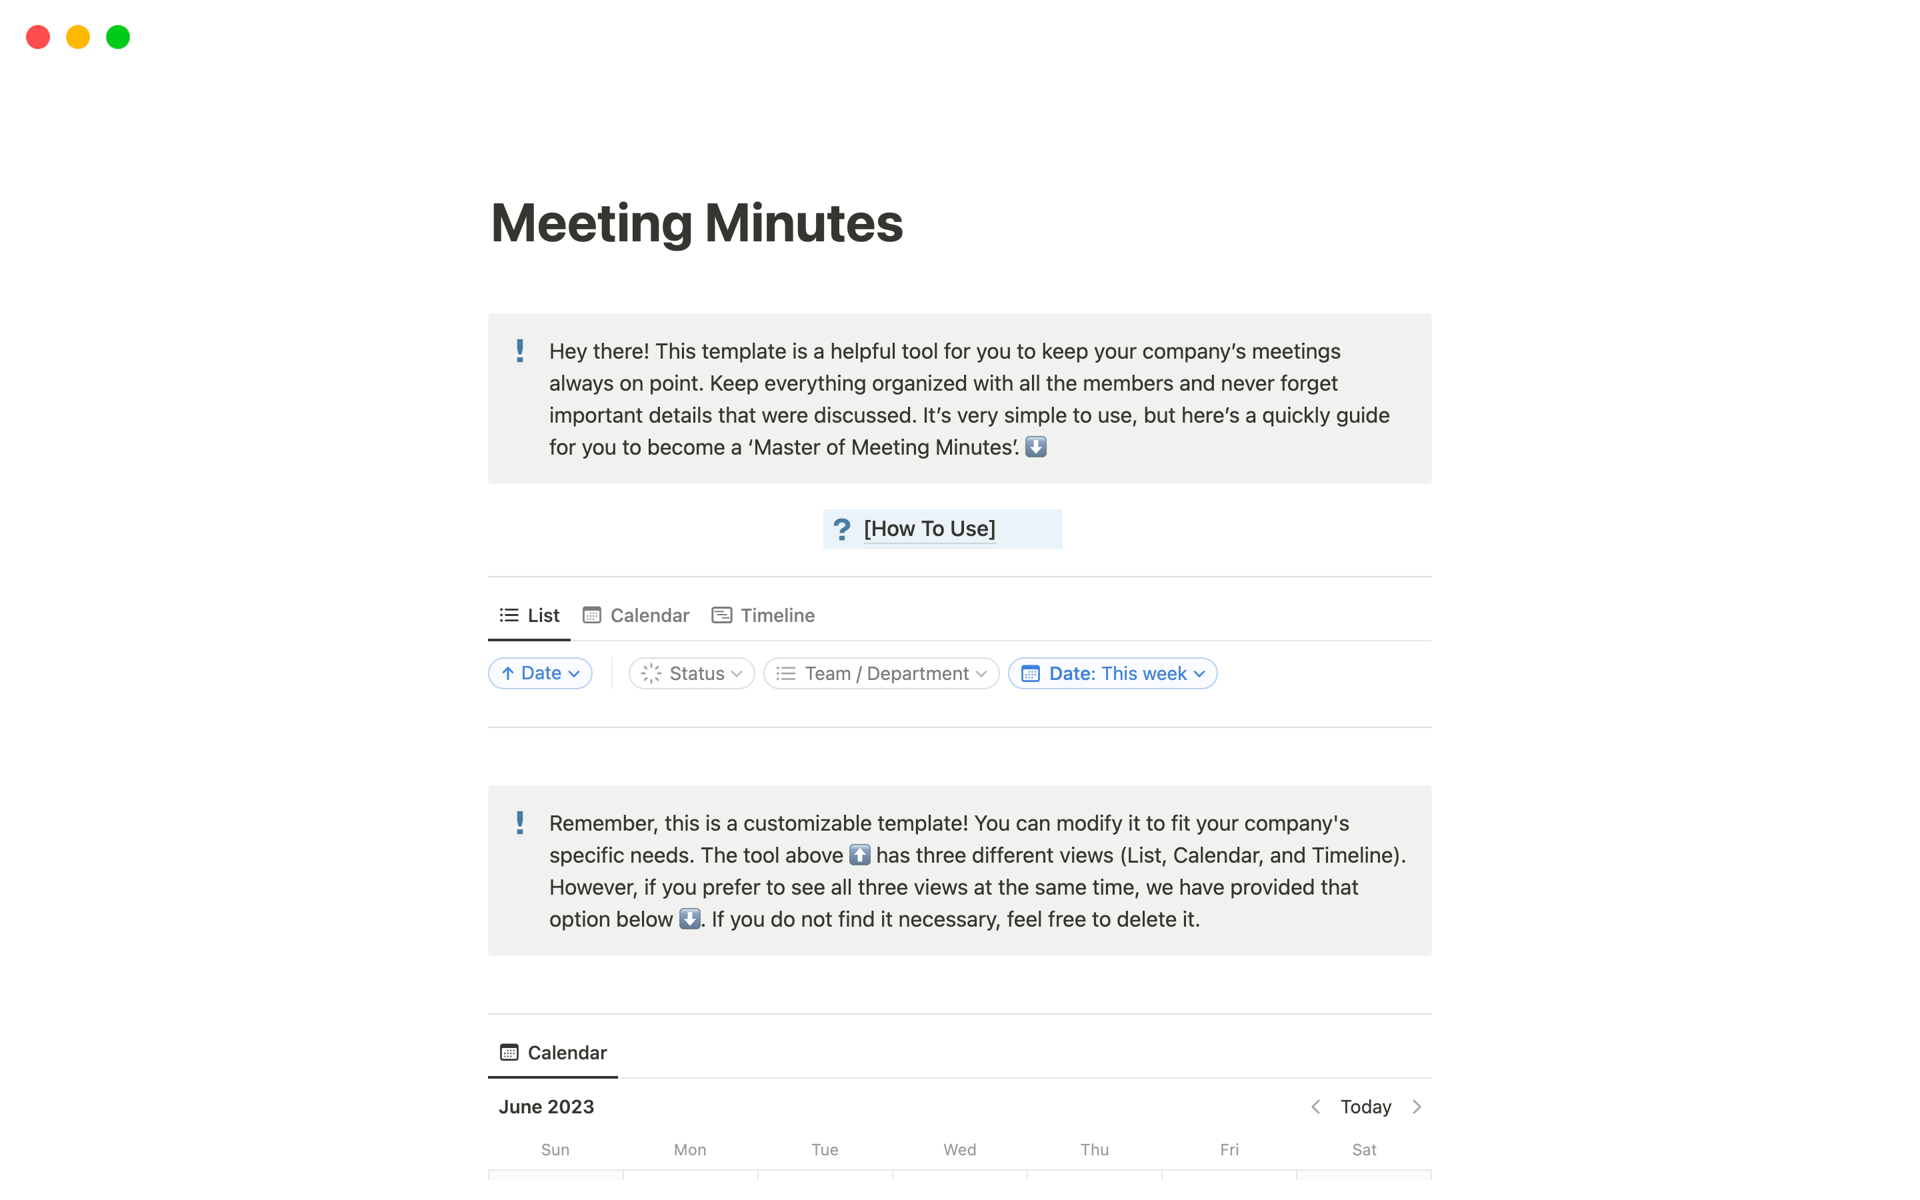 This template is a helpful tool for you to keep your company’s meetings always on point. Keep everything organized with all the members and never forget important details that were discussed.